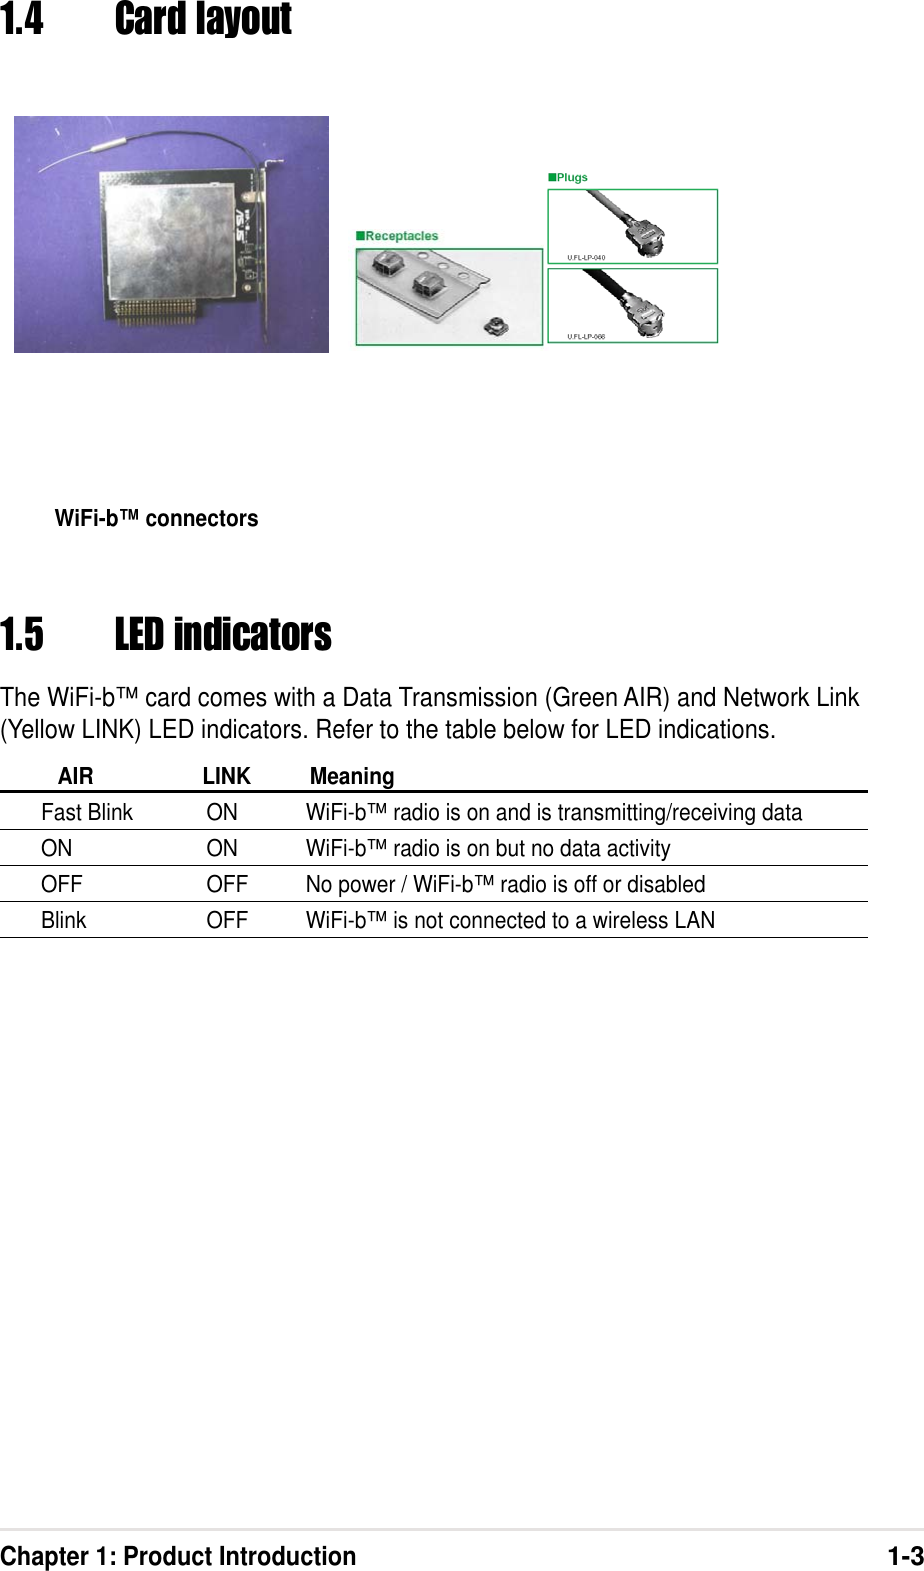 Chapter 1: Product Introduction1-31.4 Card layout1.5 LED indicatorsThe WiFi-b™ card comes with a Data Transmission (Green AIR) and Network Link(Yellow LINK) LED indicators. Refer to the table below for LED indications.AIR LINK MeaningFast Blink ON WiFi-b™ radio is on and is transmitting/receiving dataON ON WiFi-b™ radio is on but no data activityOFF OFF No power / WiFi-b™ radio is off or disabledBlink OFF WiFi-b™ is not connected to a wireless LANWiFi-b™ connectors